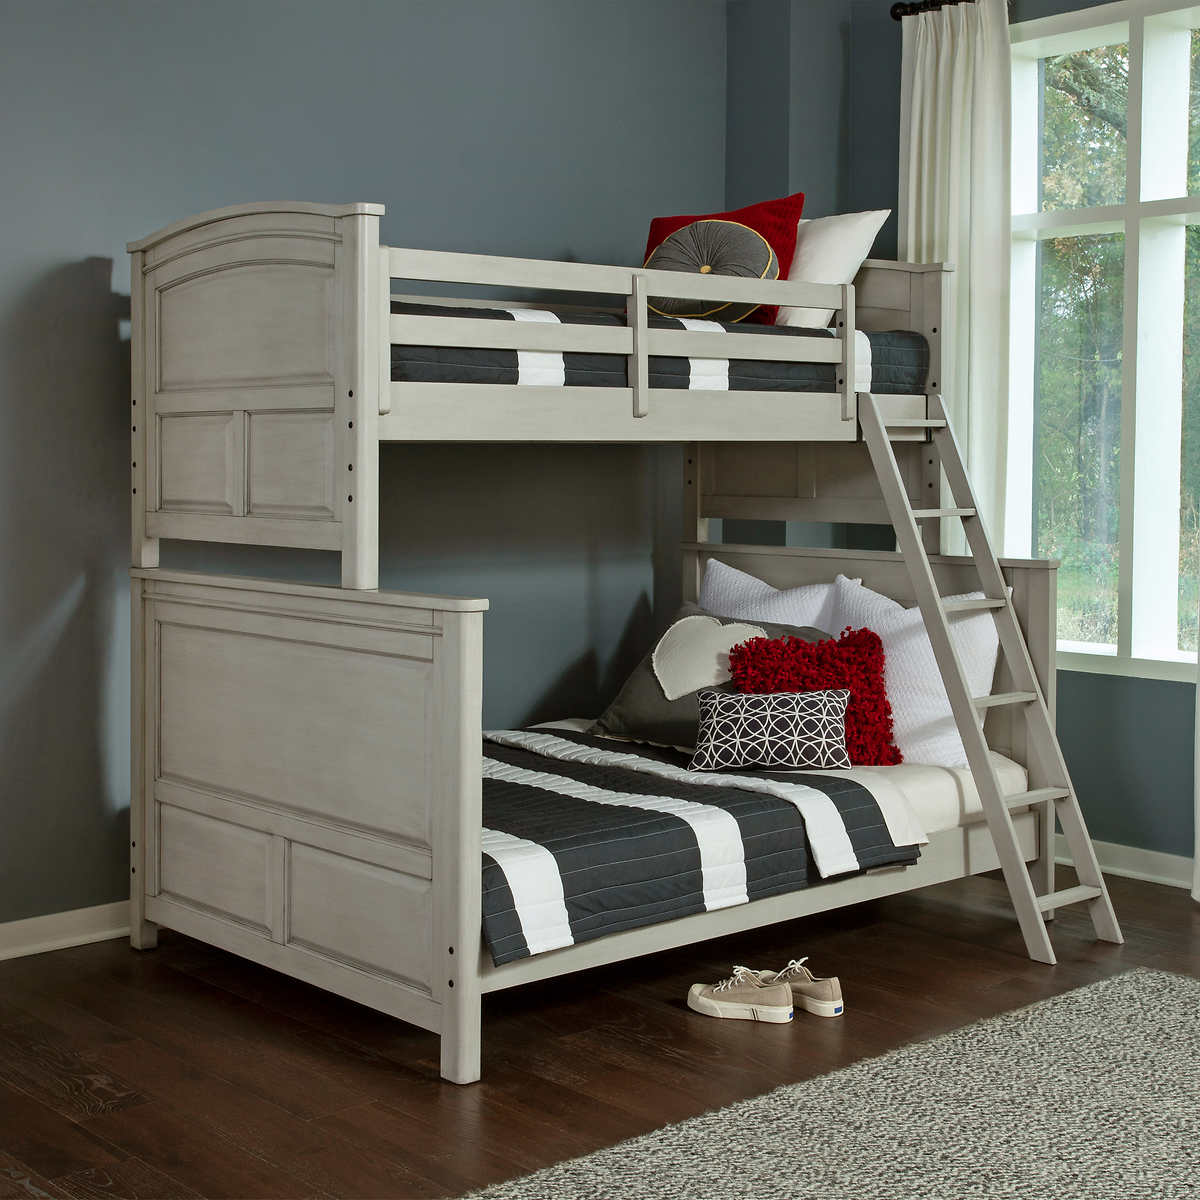 Wingate Twin Over Full Bunk Bed Costco, Bunk Bed With Full On Bottom And Twin On Top